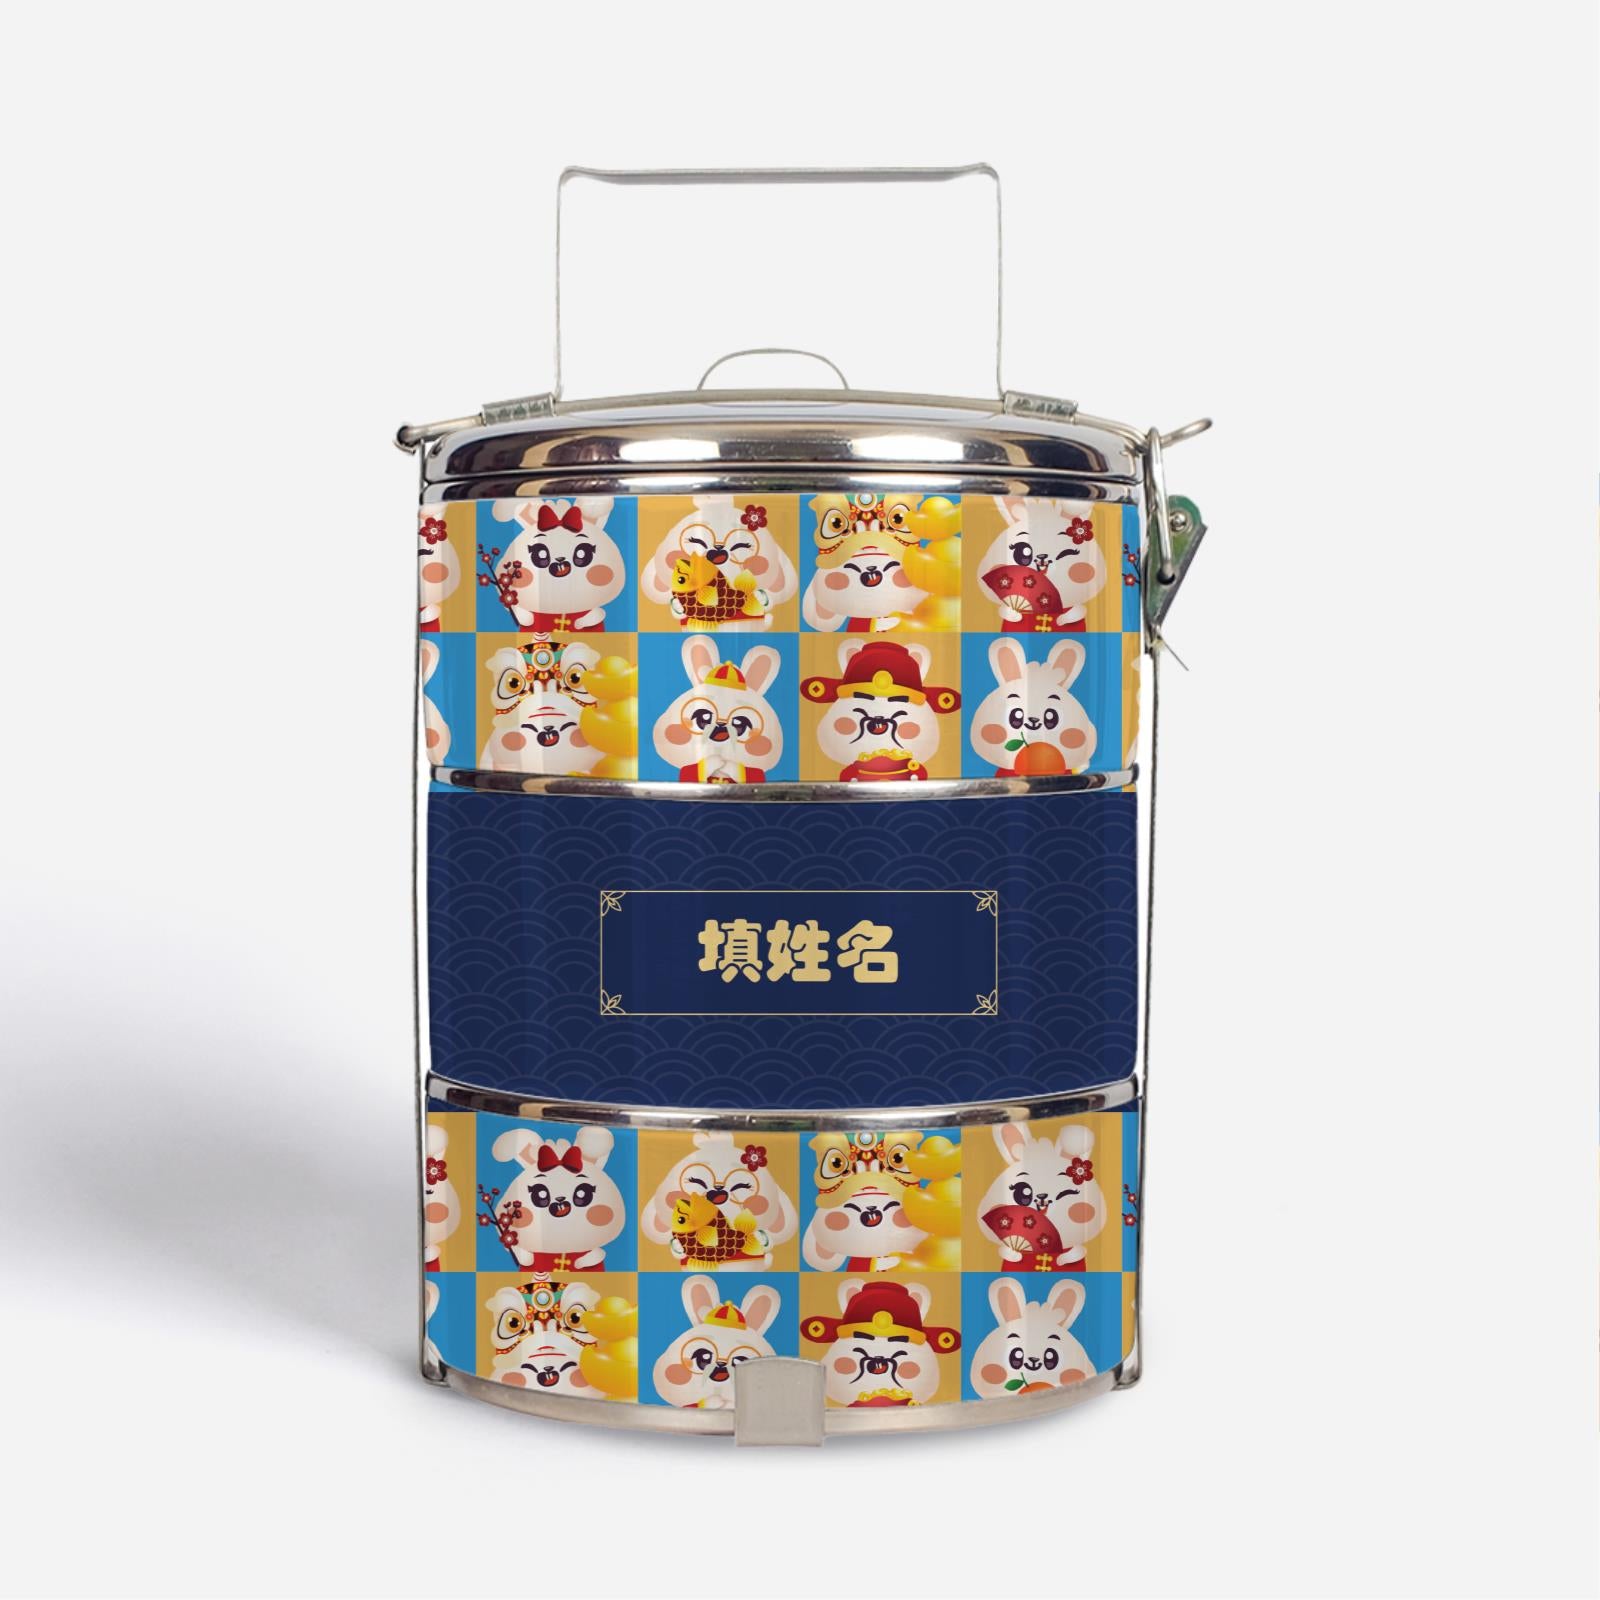 Cny Rabbit Family - Rabbit Family Blue Standard Tififn Carrier With Chinese Personalization